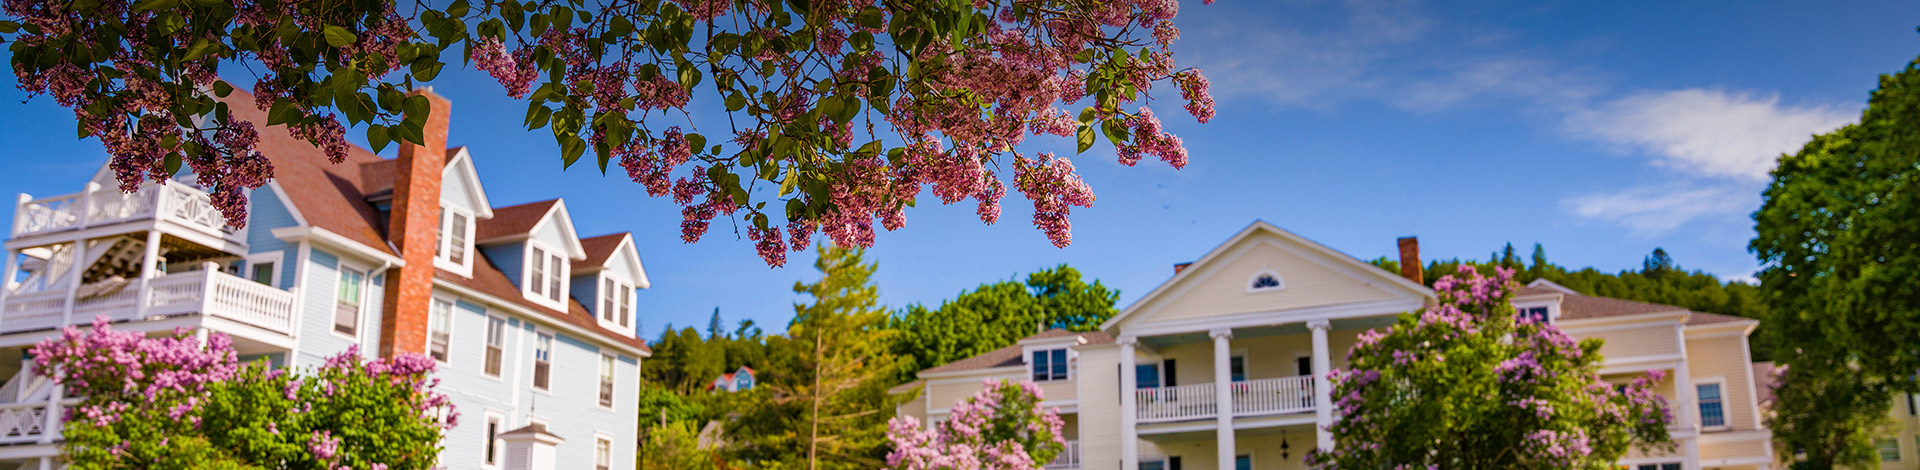 View of some houses and trees with pink flowers